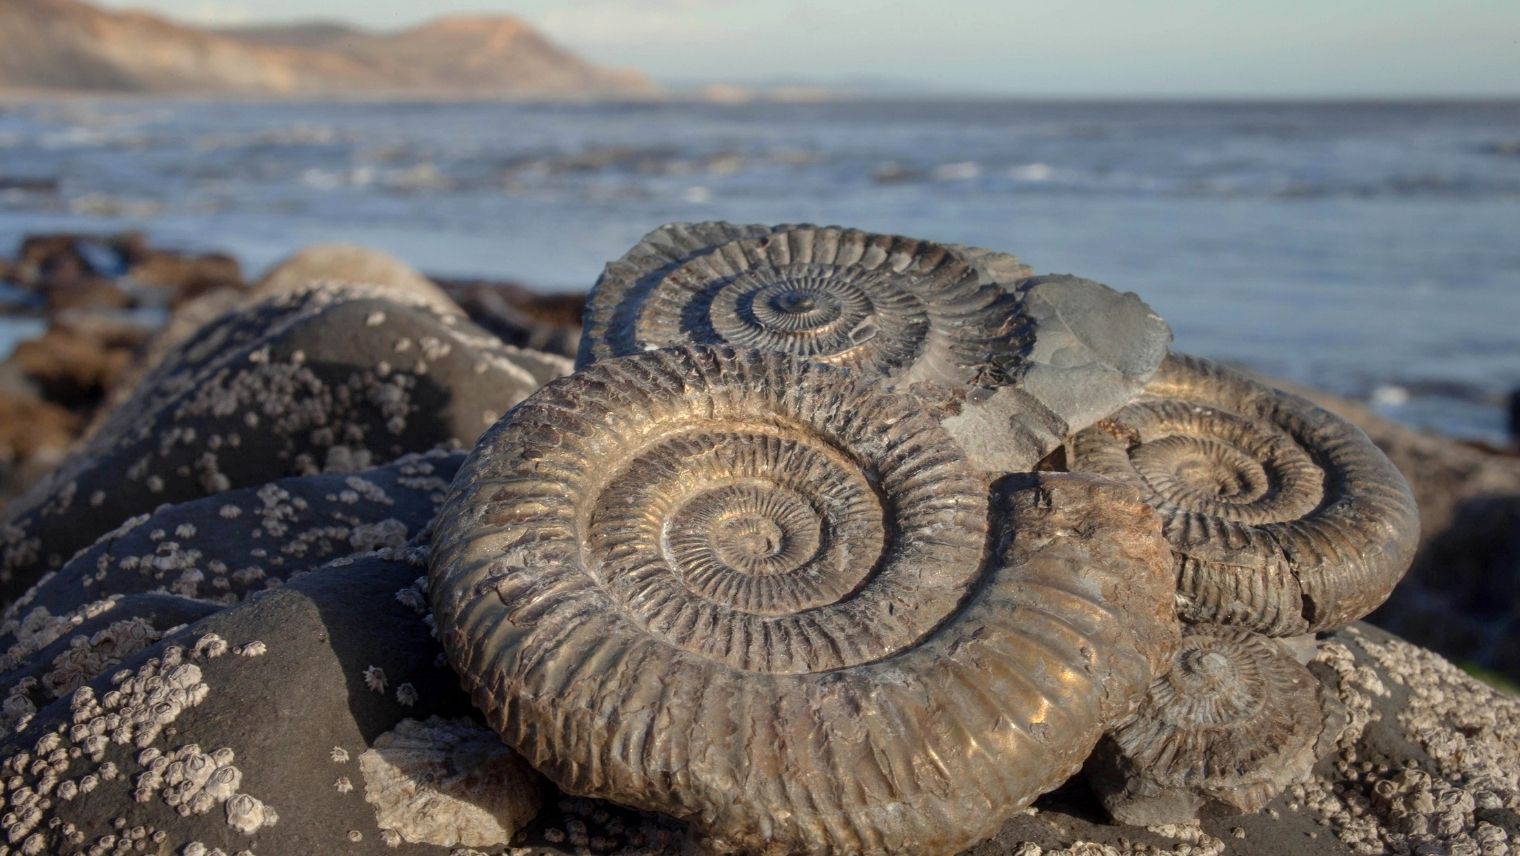 Ammonite fossils uncovered at Lyme Regis